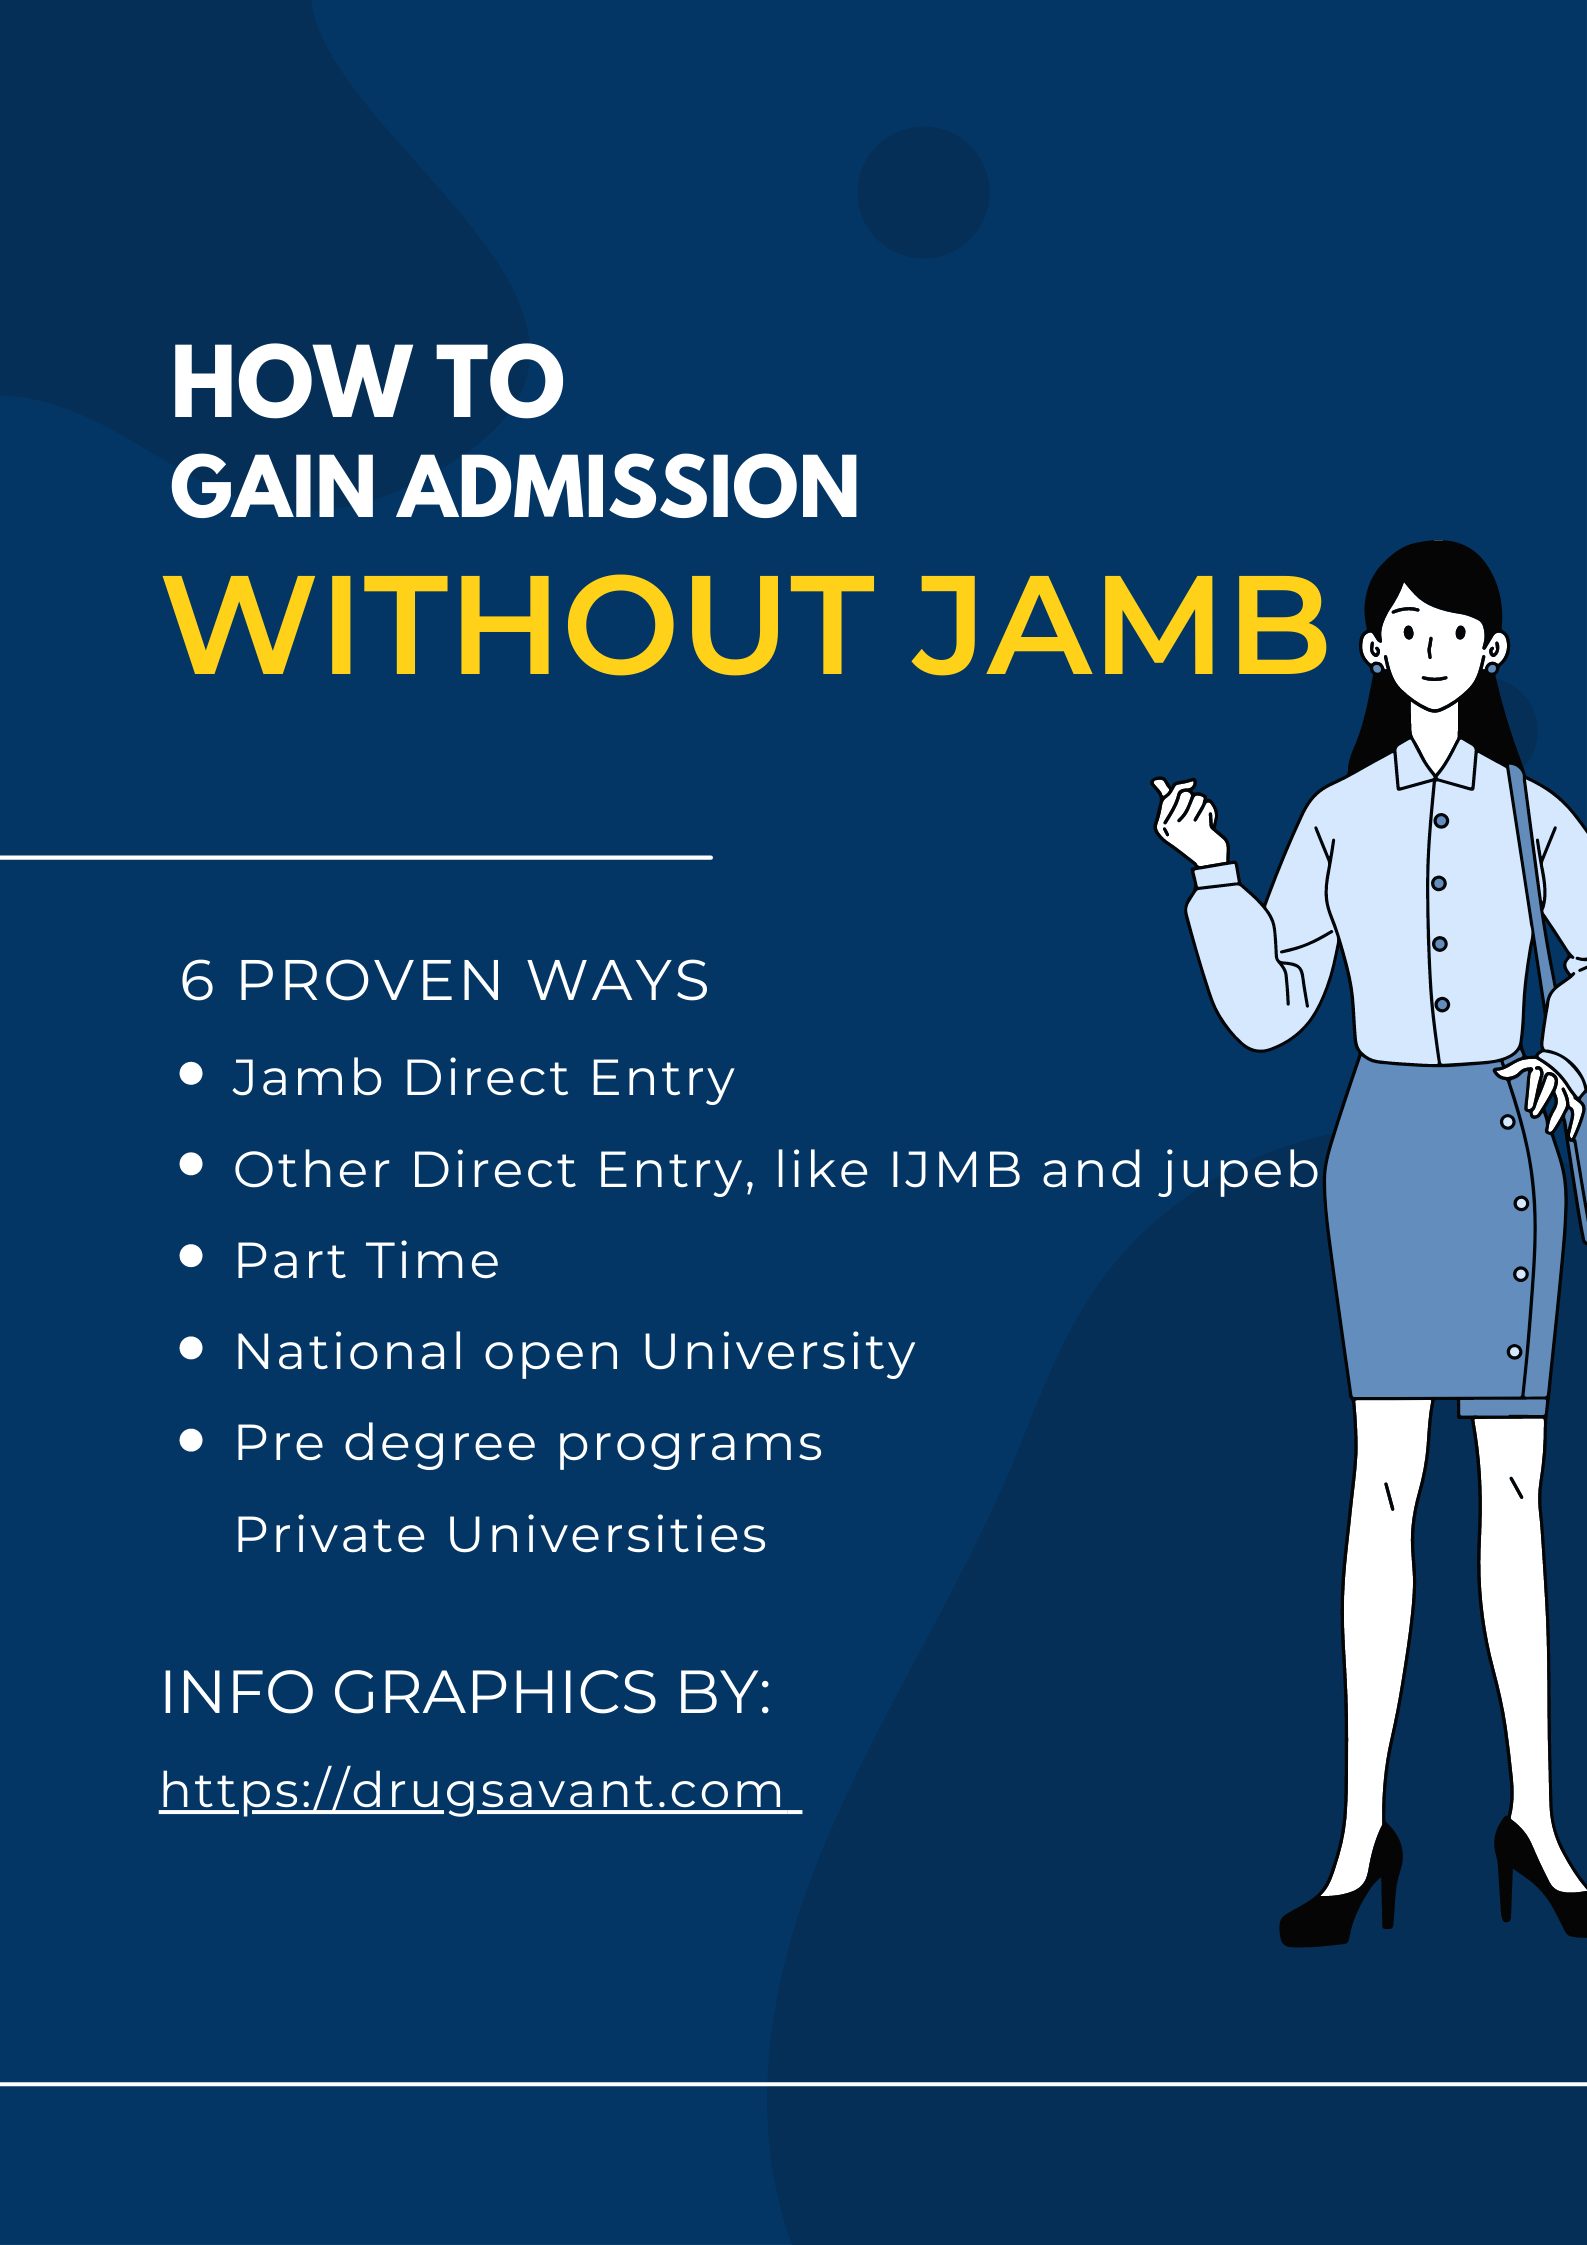 How to gain admission without using jamb